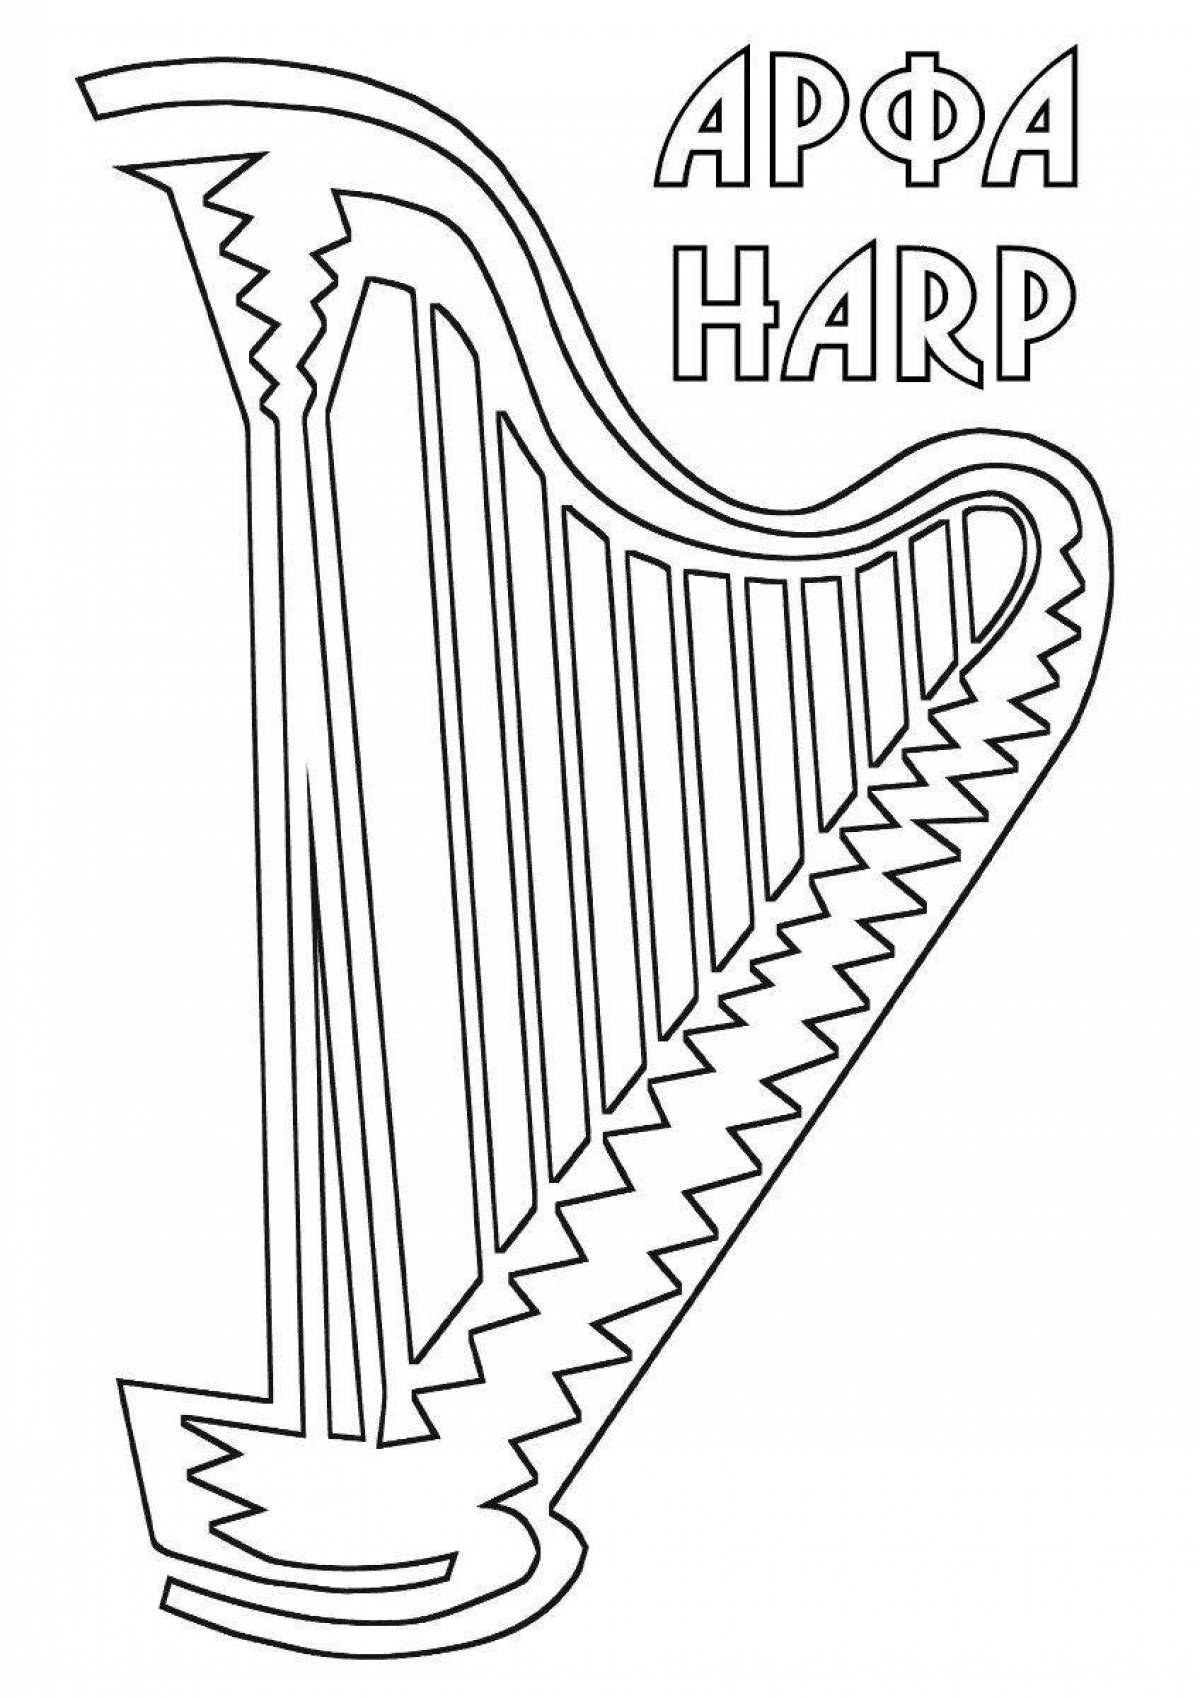 Charming harp coloring page